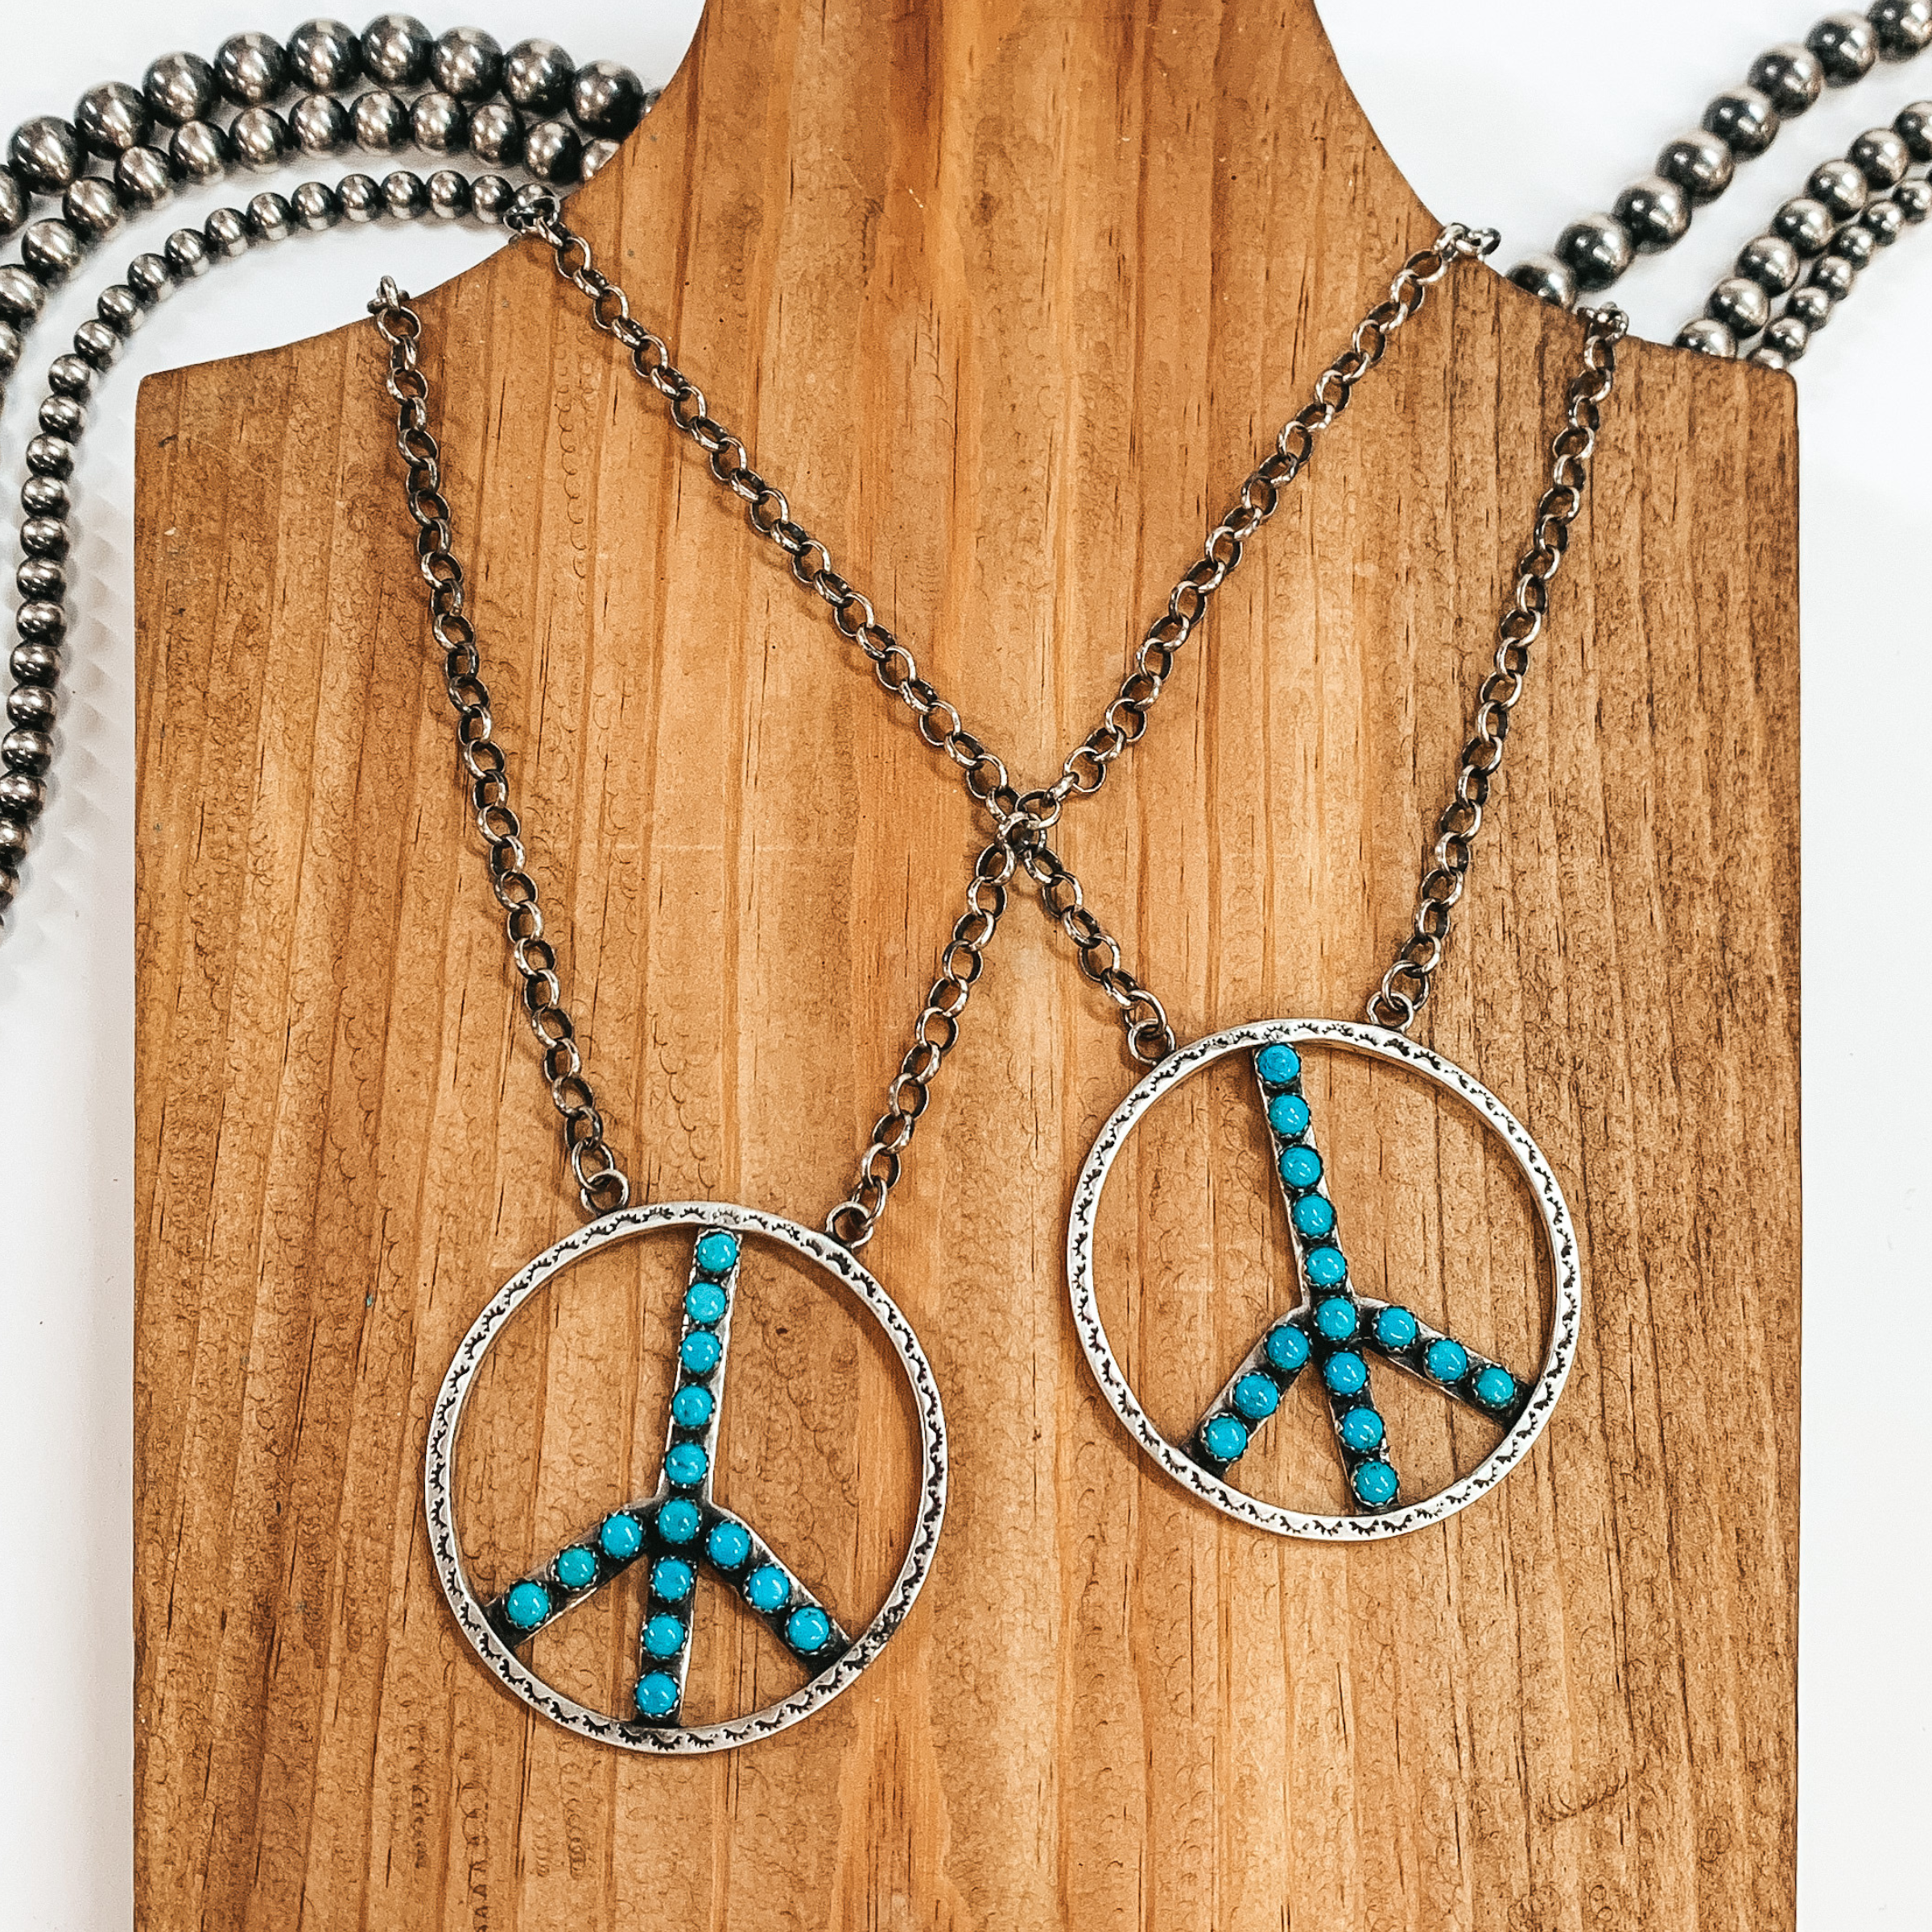 Two silver chain necklaces with a peace sign pendants. The pendants includes an engraved design and turquoise stone inlay. These necklaces are pictured on a wooden necklace holder on a white background.